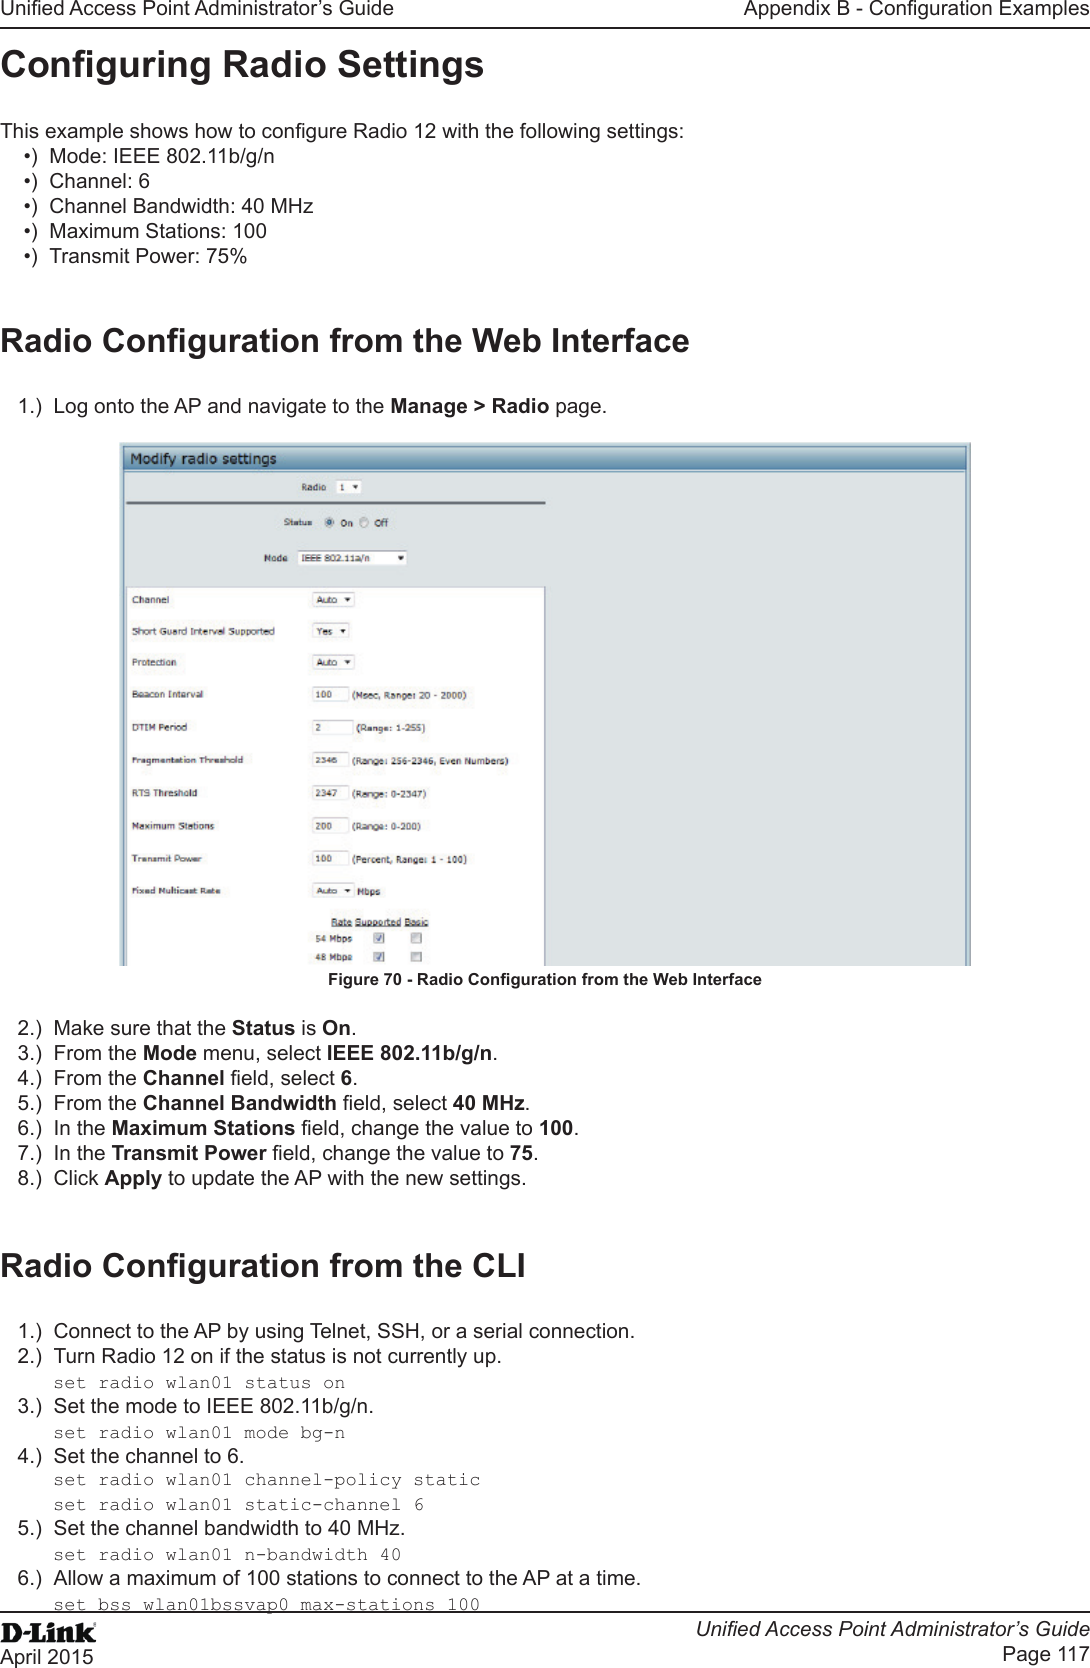 Unied Access Point Administrator’s GuideUnied Access Point Administrator’s GuidePage 117April 2015Appendix B - Conguration ExamplesConguring Radio SettingsThis example shows how to congure Radio 12 with the following settings:•)  Mode: IEEE 802.11b/g/n•)  Channel: 6•)  Channel Bandwidth: 40 MHz•)  Maximum Stations: 100•)  Transmit Power: 75%Radio Conguration from the Web Interface1.)  Log onto the AP and navigate to the Manage &gt; Radio page.Figure 70 - Radio Conguration from the Web Interface2.)  Make sure that the Status is On.3.)  From the Mode menu, select IEEE 802.11b/g/n.4.)  From the Channel eld, select 6. 5.)  From the Channel Bandwidth eld, select 40 MHz.6.)  In the Maximum Stations eld, change the value to 100.7.)  In the Transmit Power eld, change the value to 75.8.)  Click Apply to update the AP with the new settings.Radio Conguration from the CLI1.)  Connect to the AP by using Telnet, SSH, or a serial connection.2.)  Turn Radio 12 on if the status is not currently up.set radio wlan01 status on3.)  Set the mode to IEEE 802.11b/g/n.set radio wlan01 mode bg-n4.)  Set the channel to 6. set radio wlan01 channel-policy staticset radio wlan01 static-channel 65.)  Set the channel bandwidth to 40 MHz.set radio wlan01 n-bandwidth 406.)  Allow a maximum of 100 stations to connect to the AP at a time.set bss wlan01bssvap0 max-stations 100